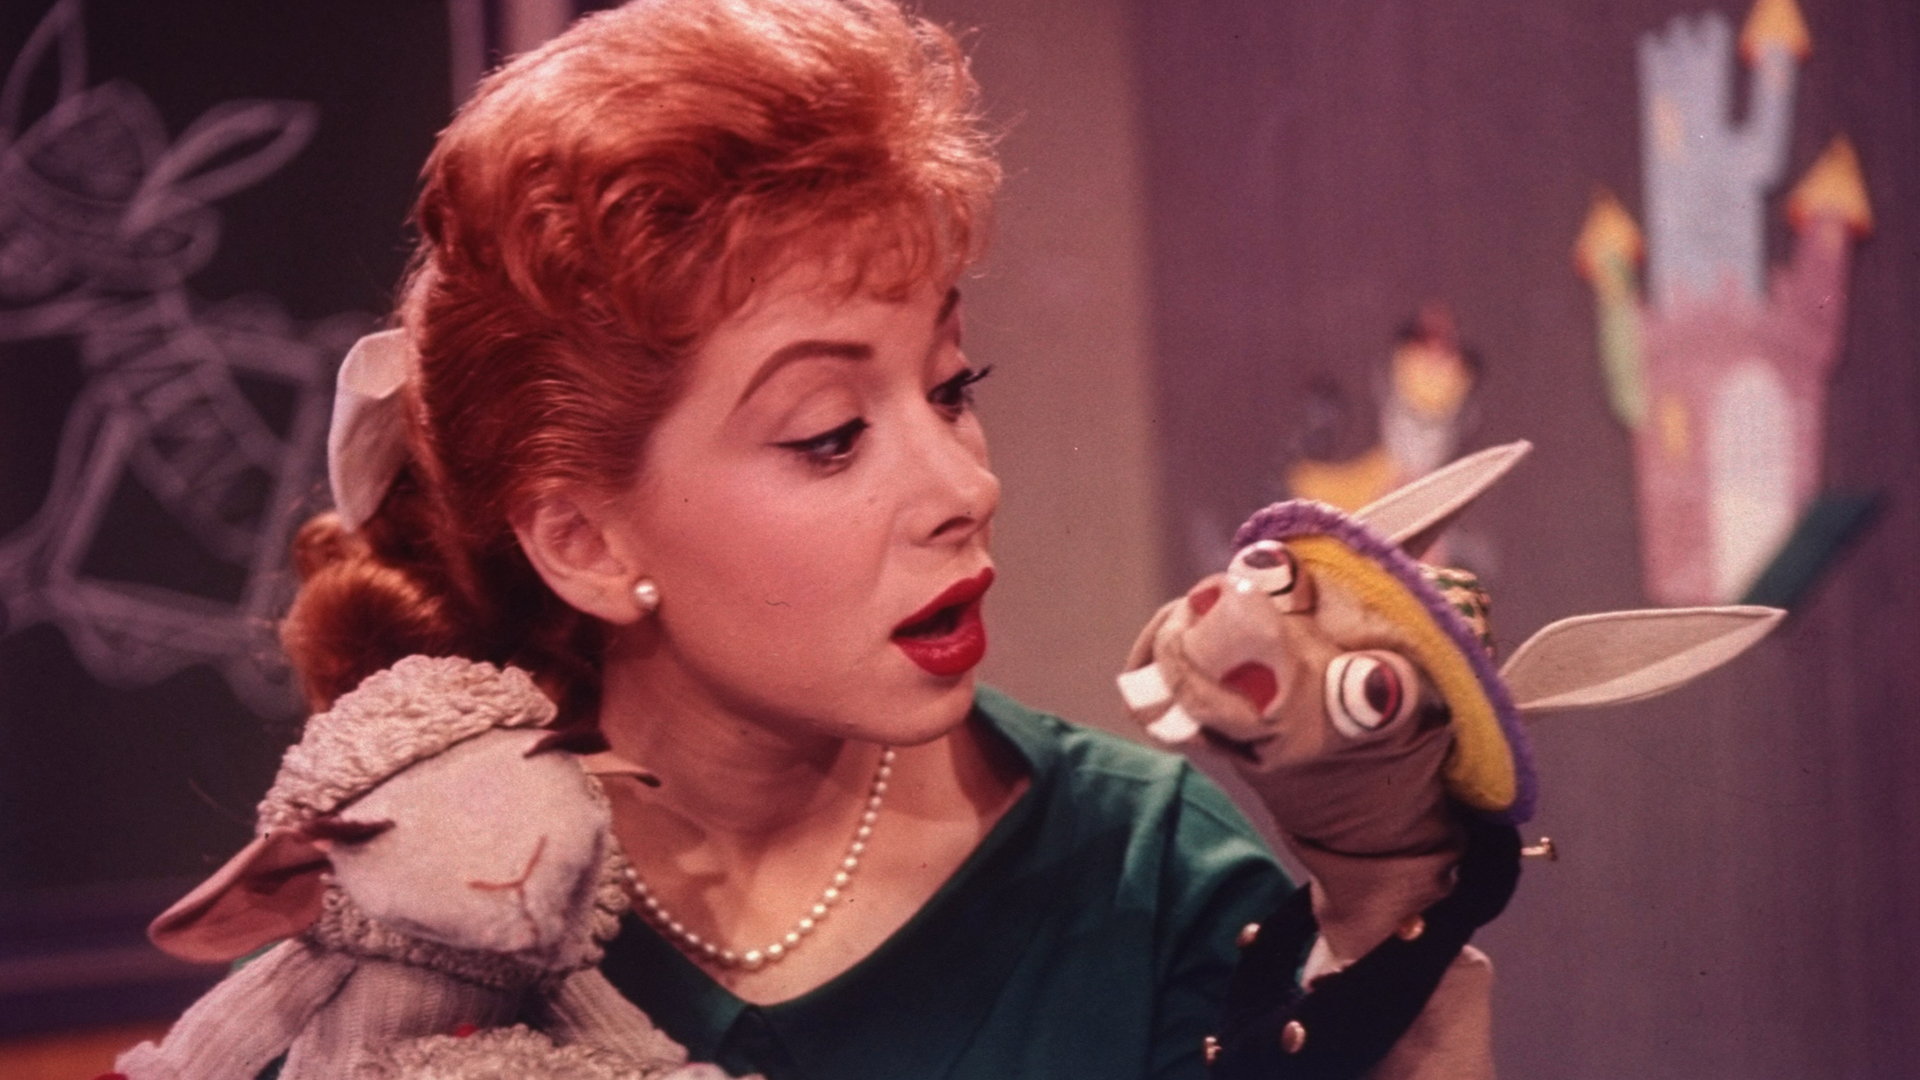 September 28, 1963: The Last Episode of “The Shari Lewis Show” Aired on NBC